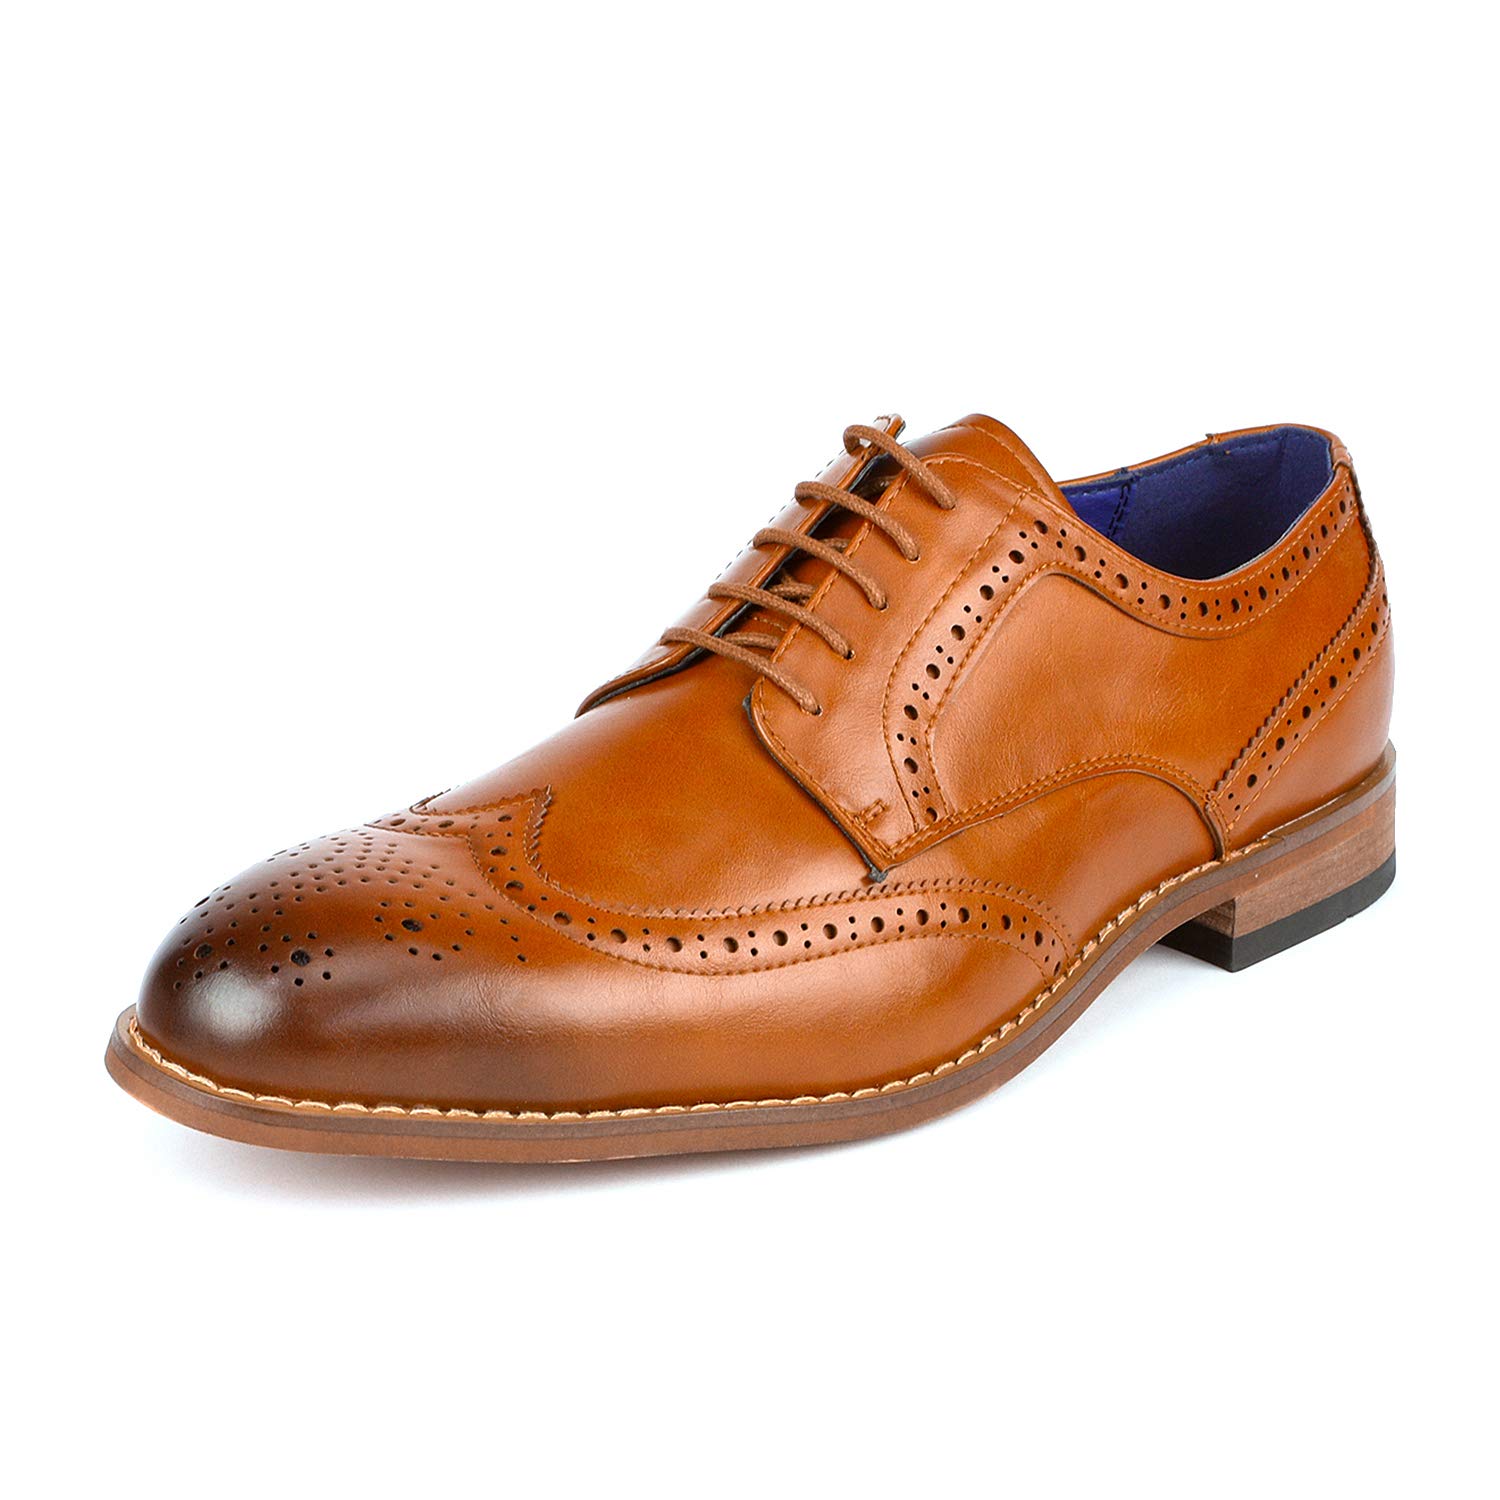 Bruno Marc Mens Brogue Oxford Shoes Lace up Wing Tip Dress Shoes Casual Shoes WILLIAM_2 CAMEL Size 8.5 - image 1 of 5